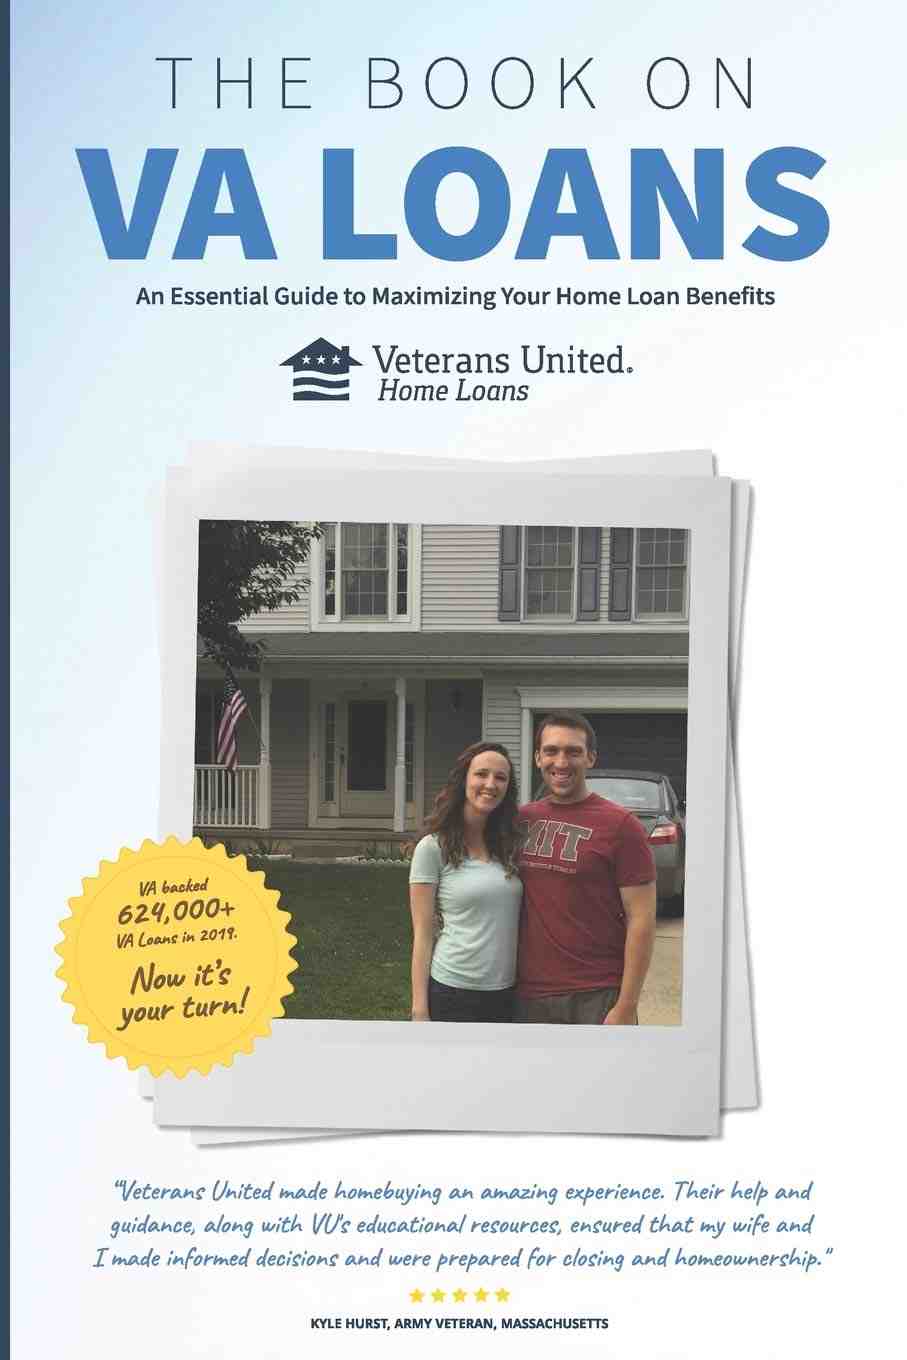 Are VA loans a hassle for the seller?